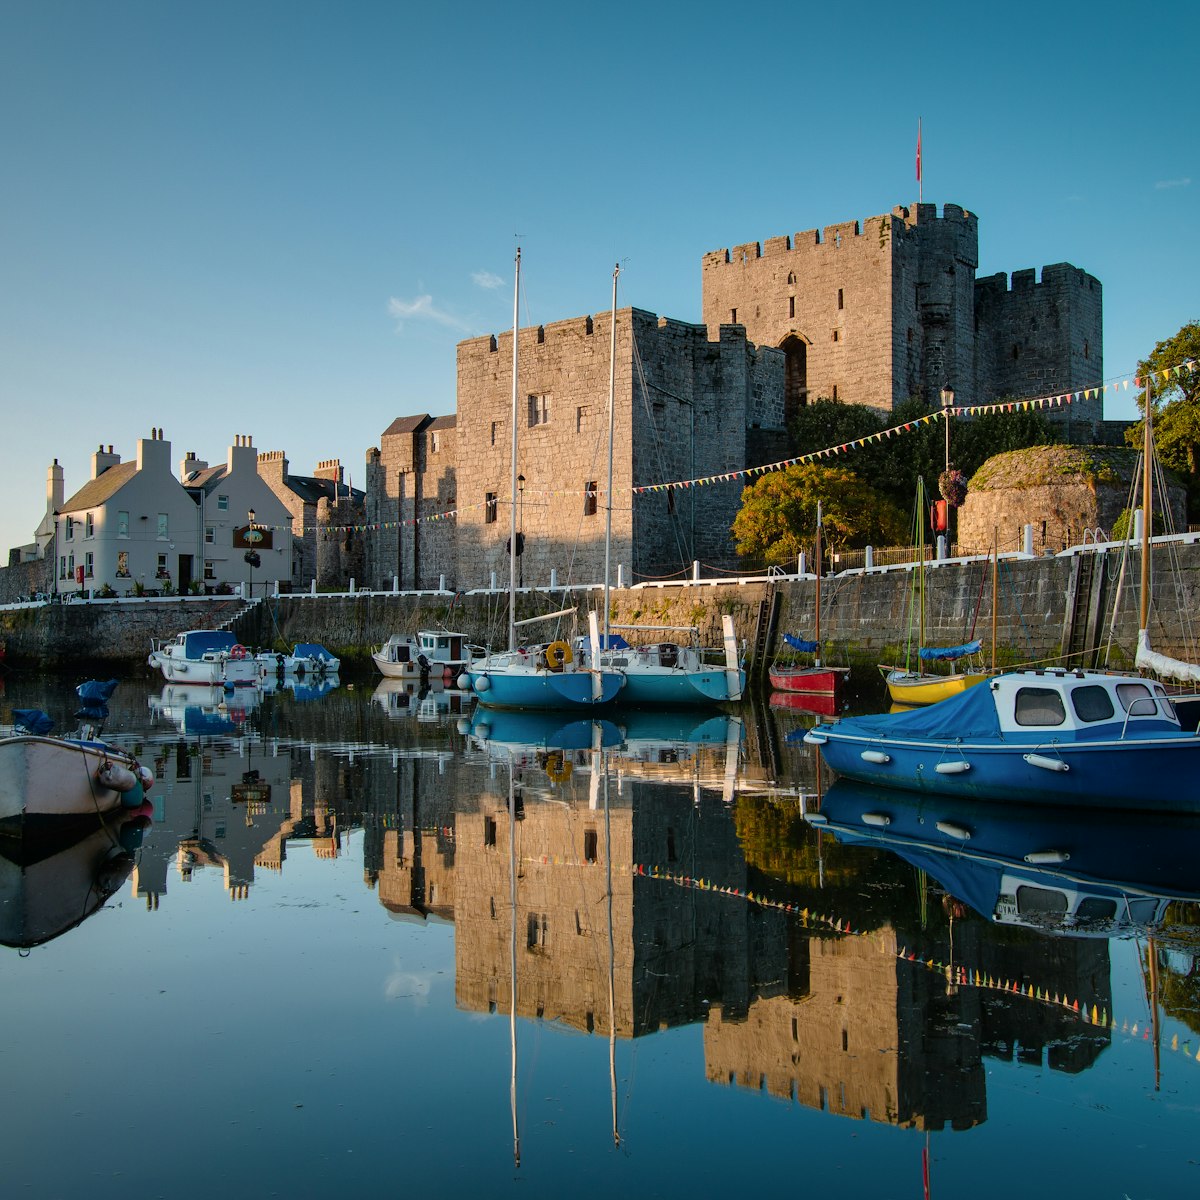 Castle Rushen in Castletown in the Isle of Man, with reflections in the harbor - taken shortly after sunrise; Shutterstock ID 452503759; full: digital; gl: 65050; netsuite: poi; your: Barbara Di Castro
452503759
